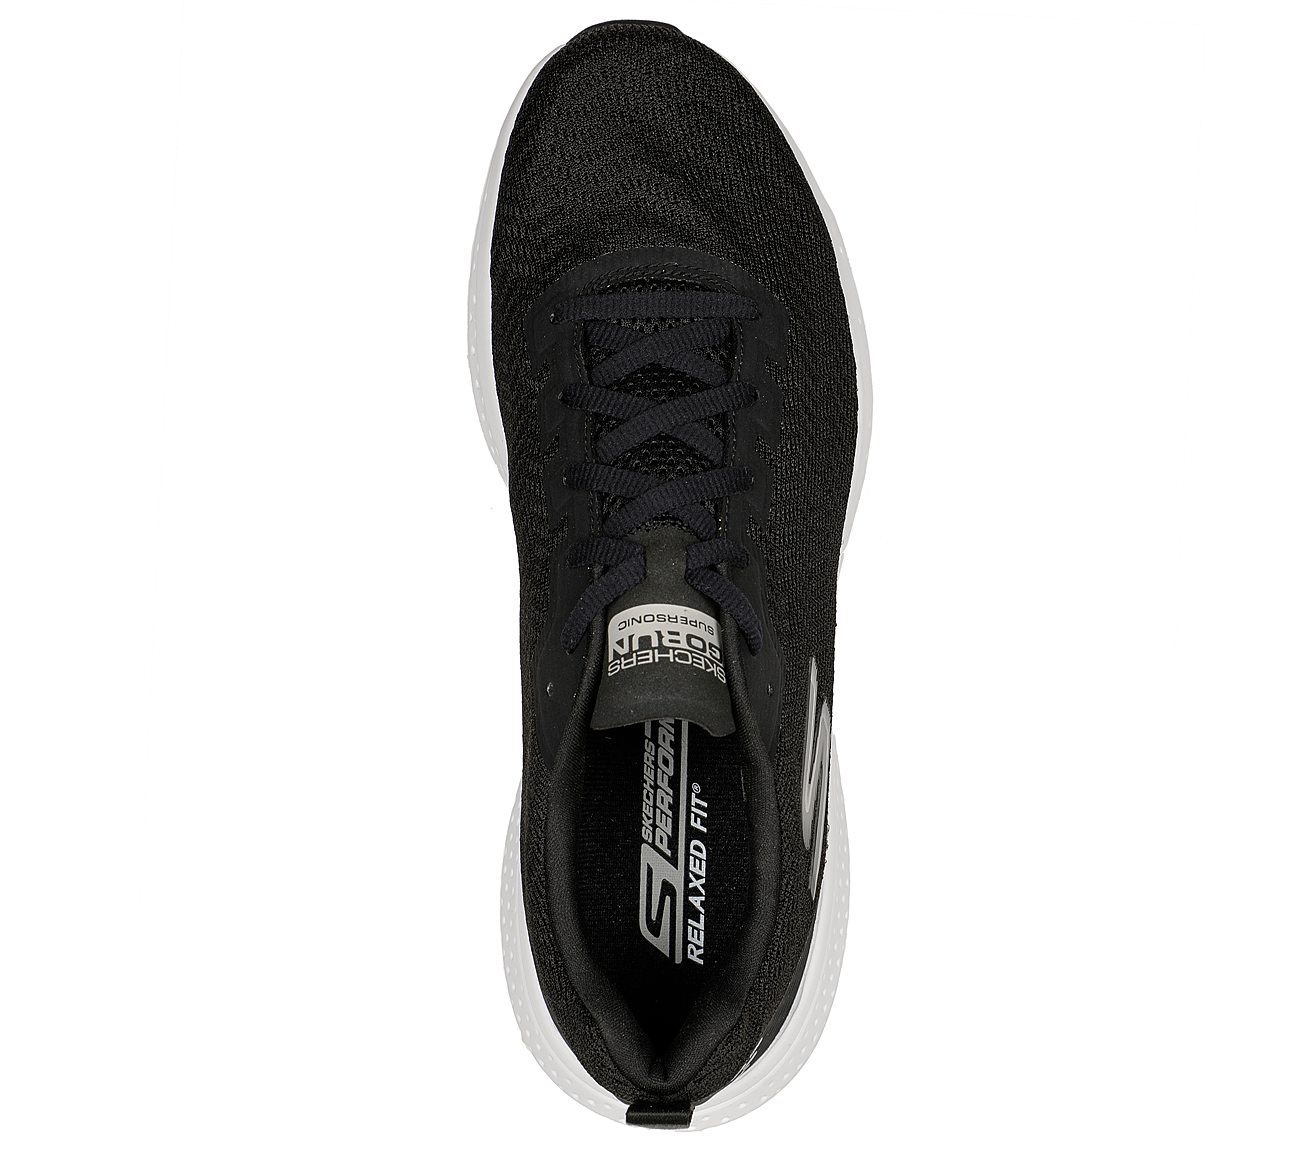 GO RUN SUPERSONIC, BLACK/WHITE Footwear Top View